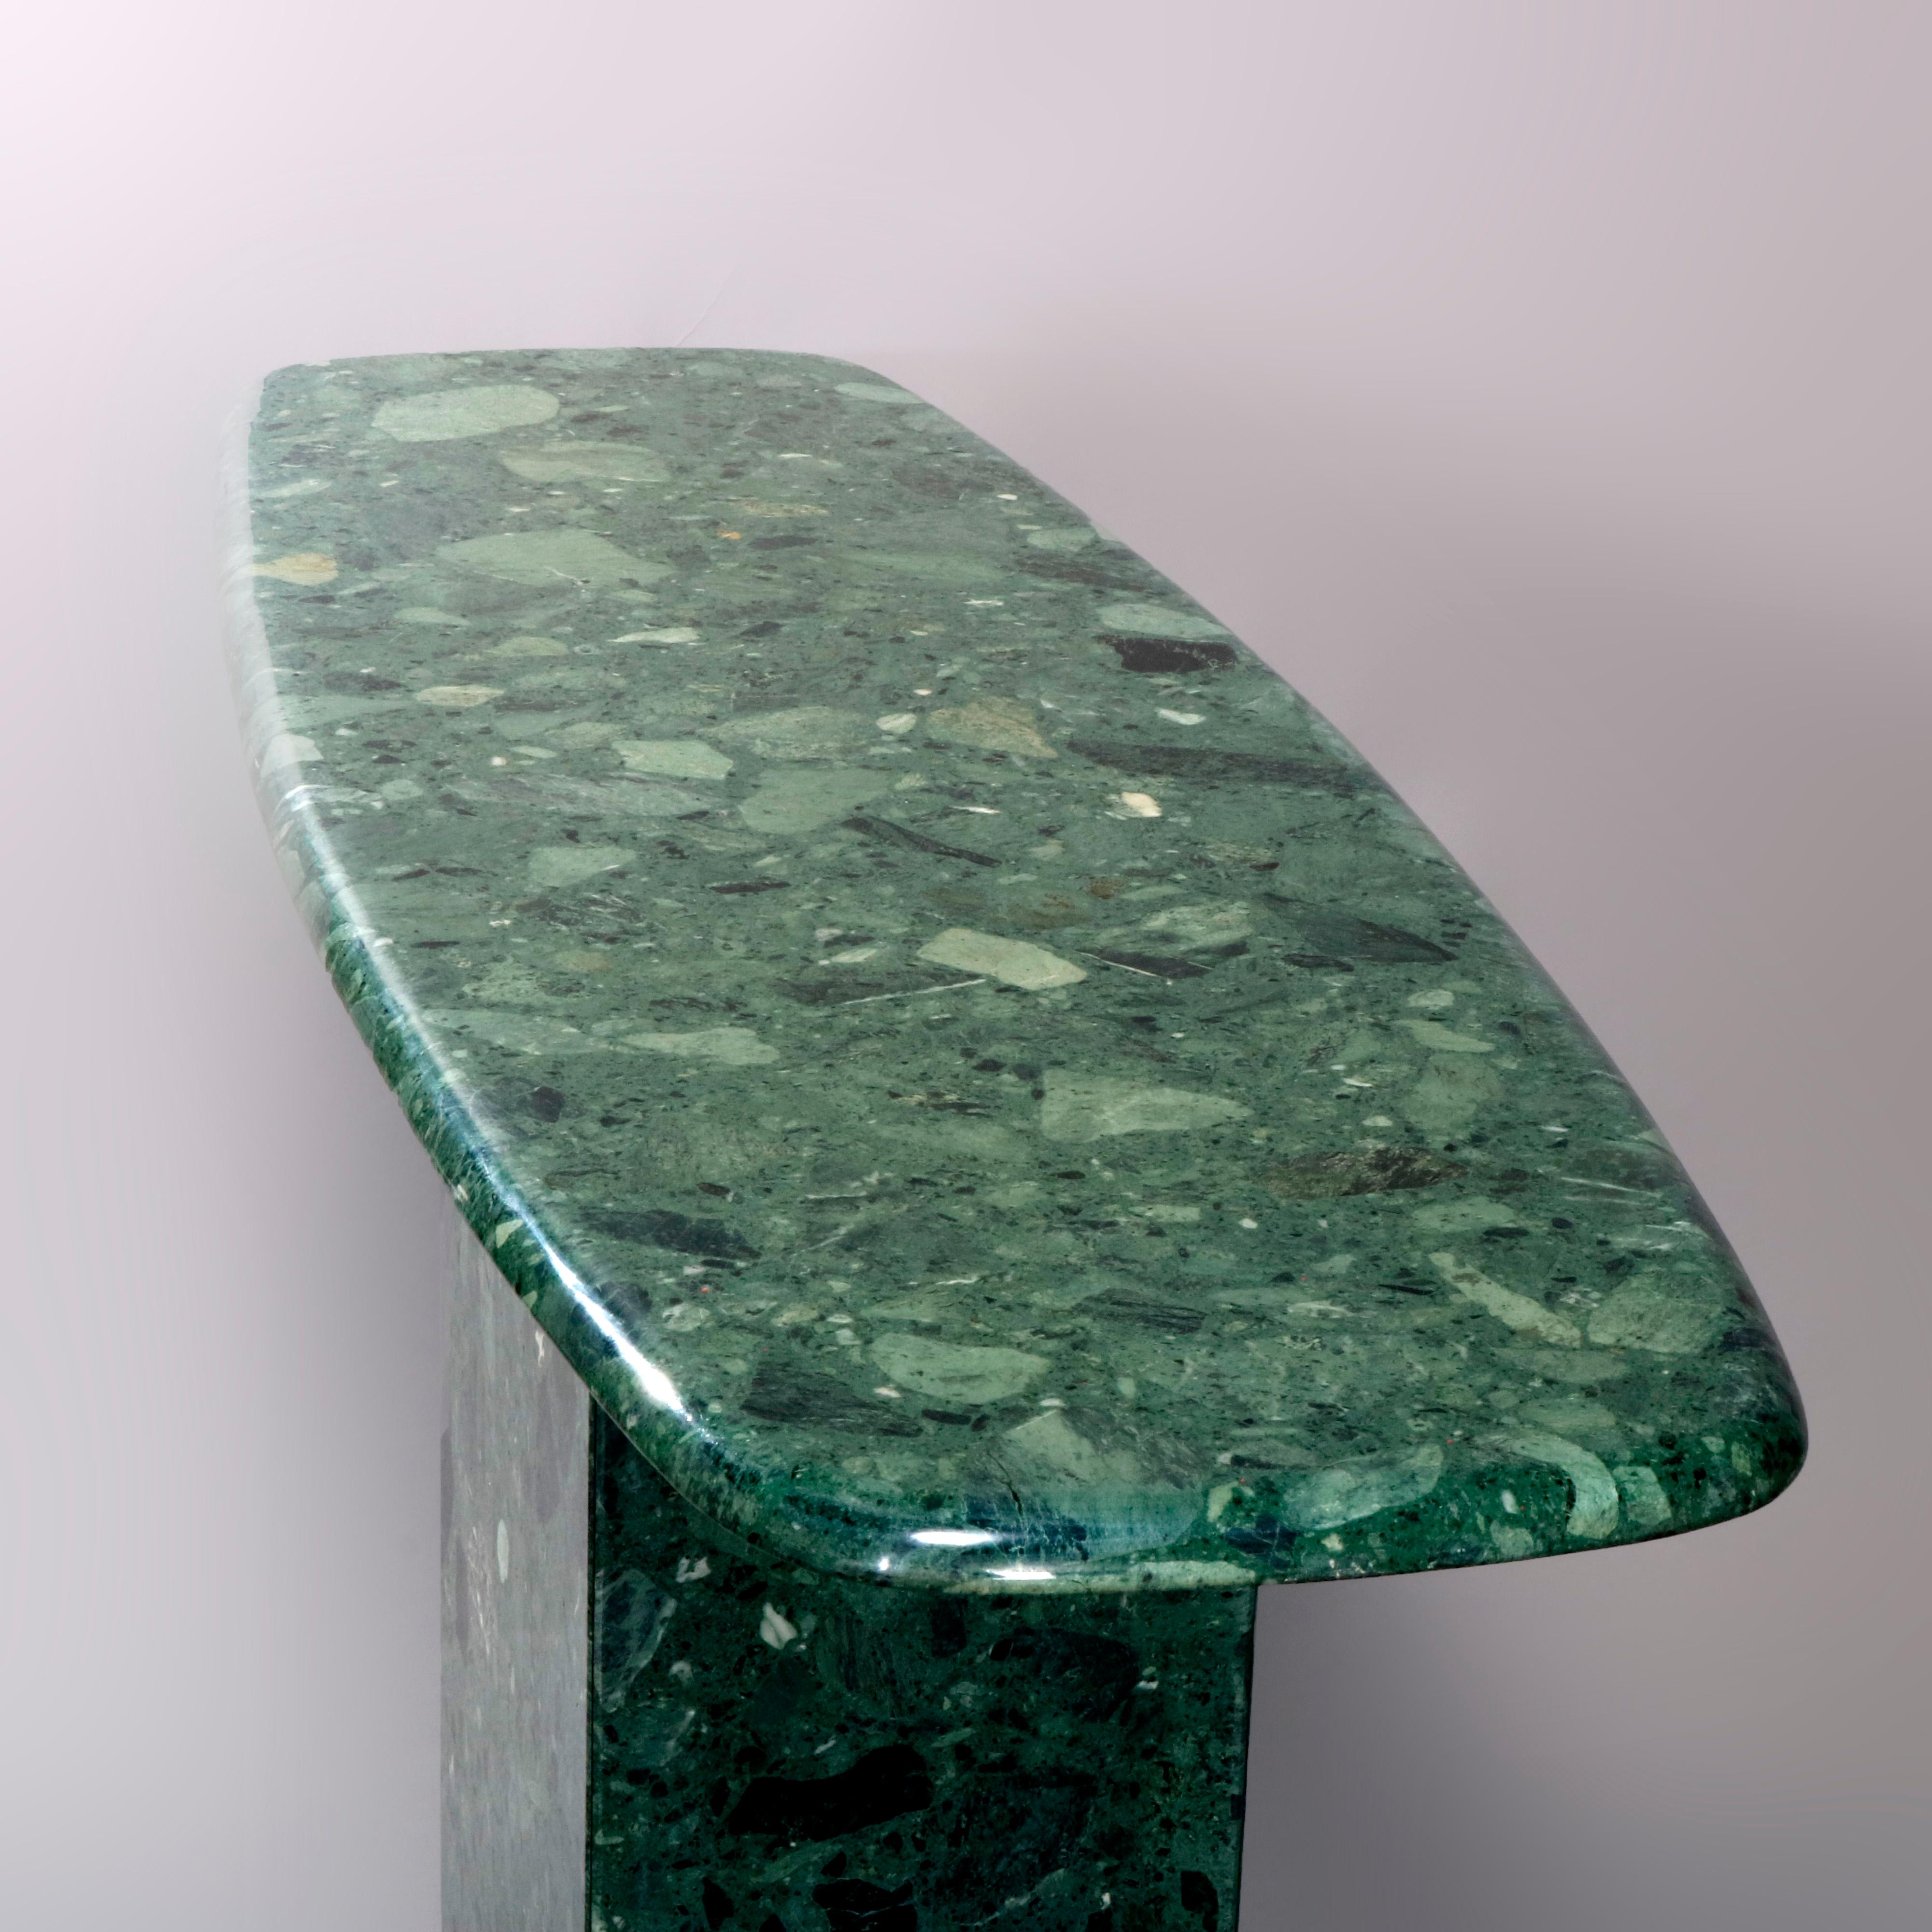 A Mid-Century Modern console table offers green granite construction with stylized oval surfboard form top surmounting square pedestal, circa 1960

Measures: 29.75